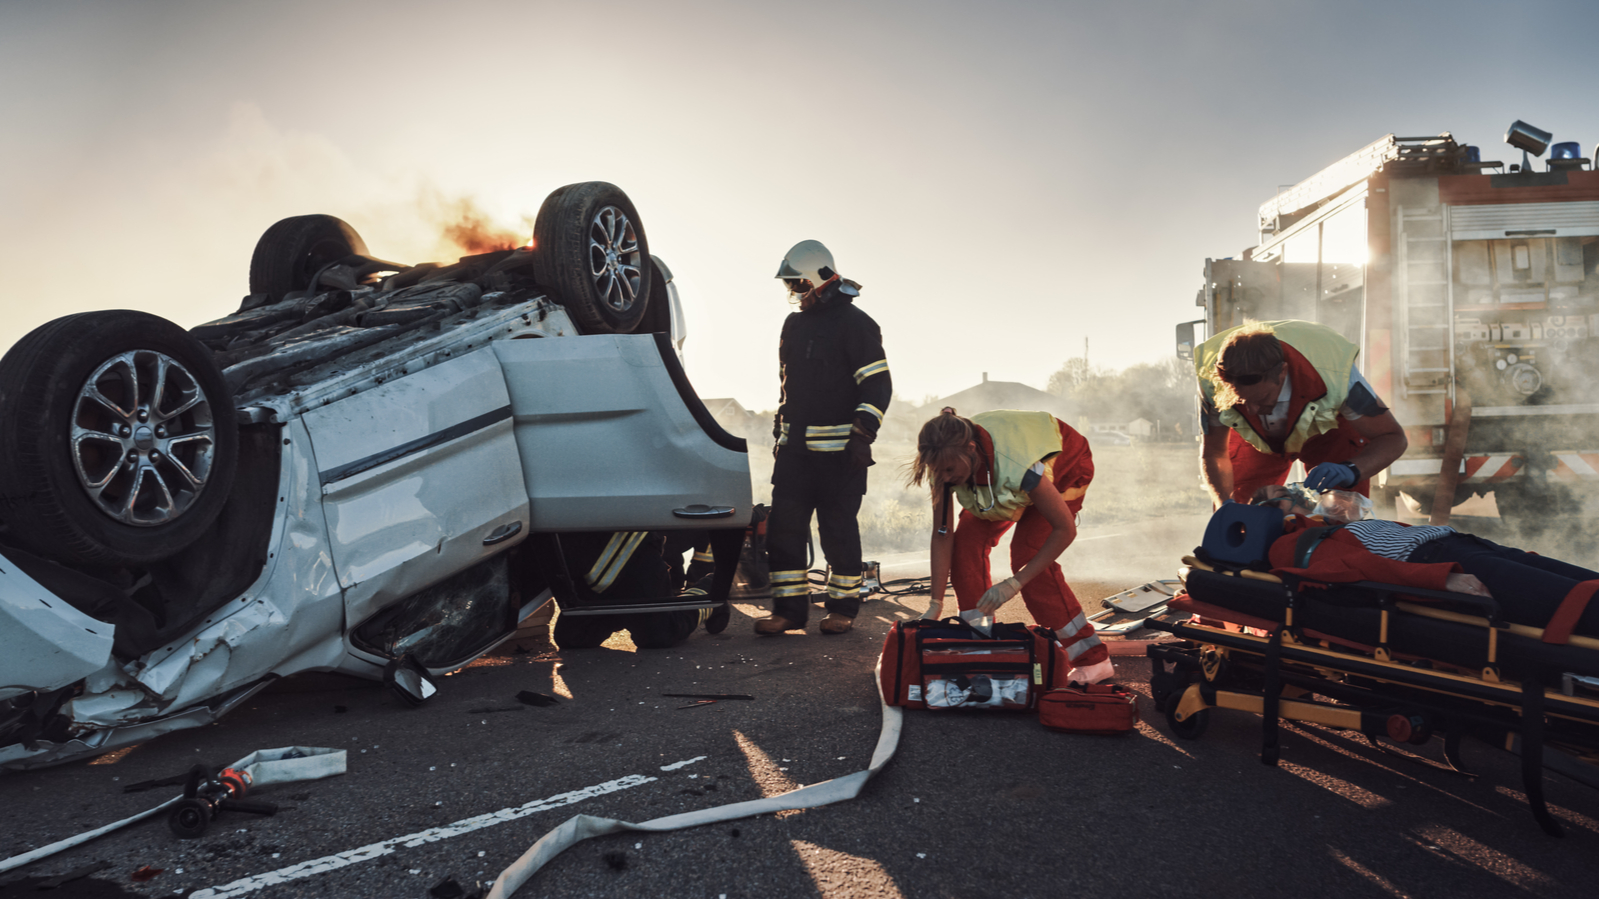 Truck Accident Law Firm in St. Clair County, IL | St. Clair County, IL Truck Accident Lawyer | Burger Law